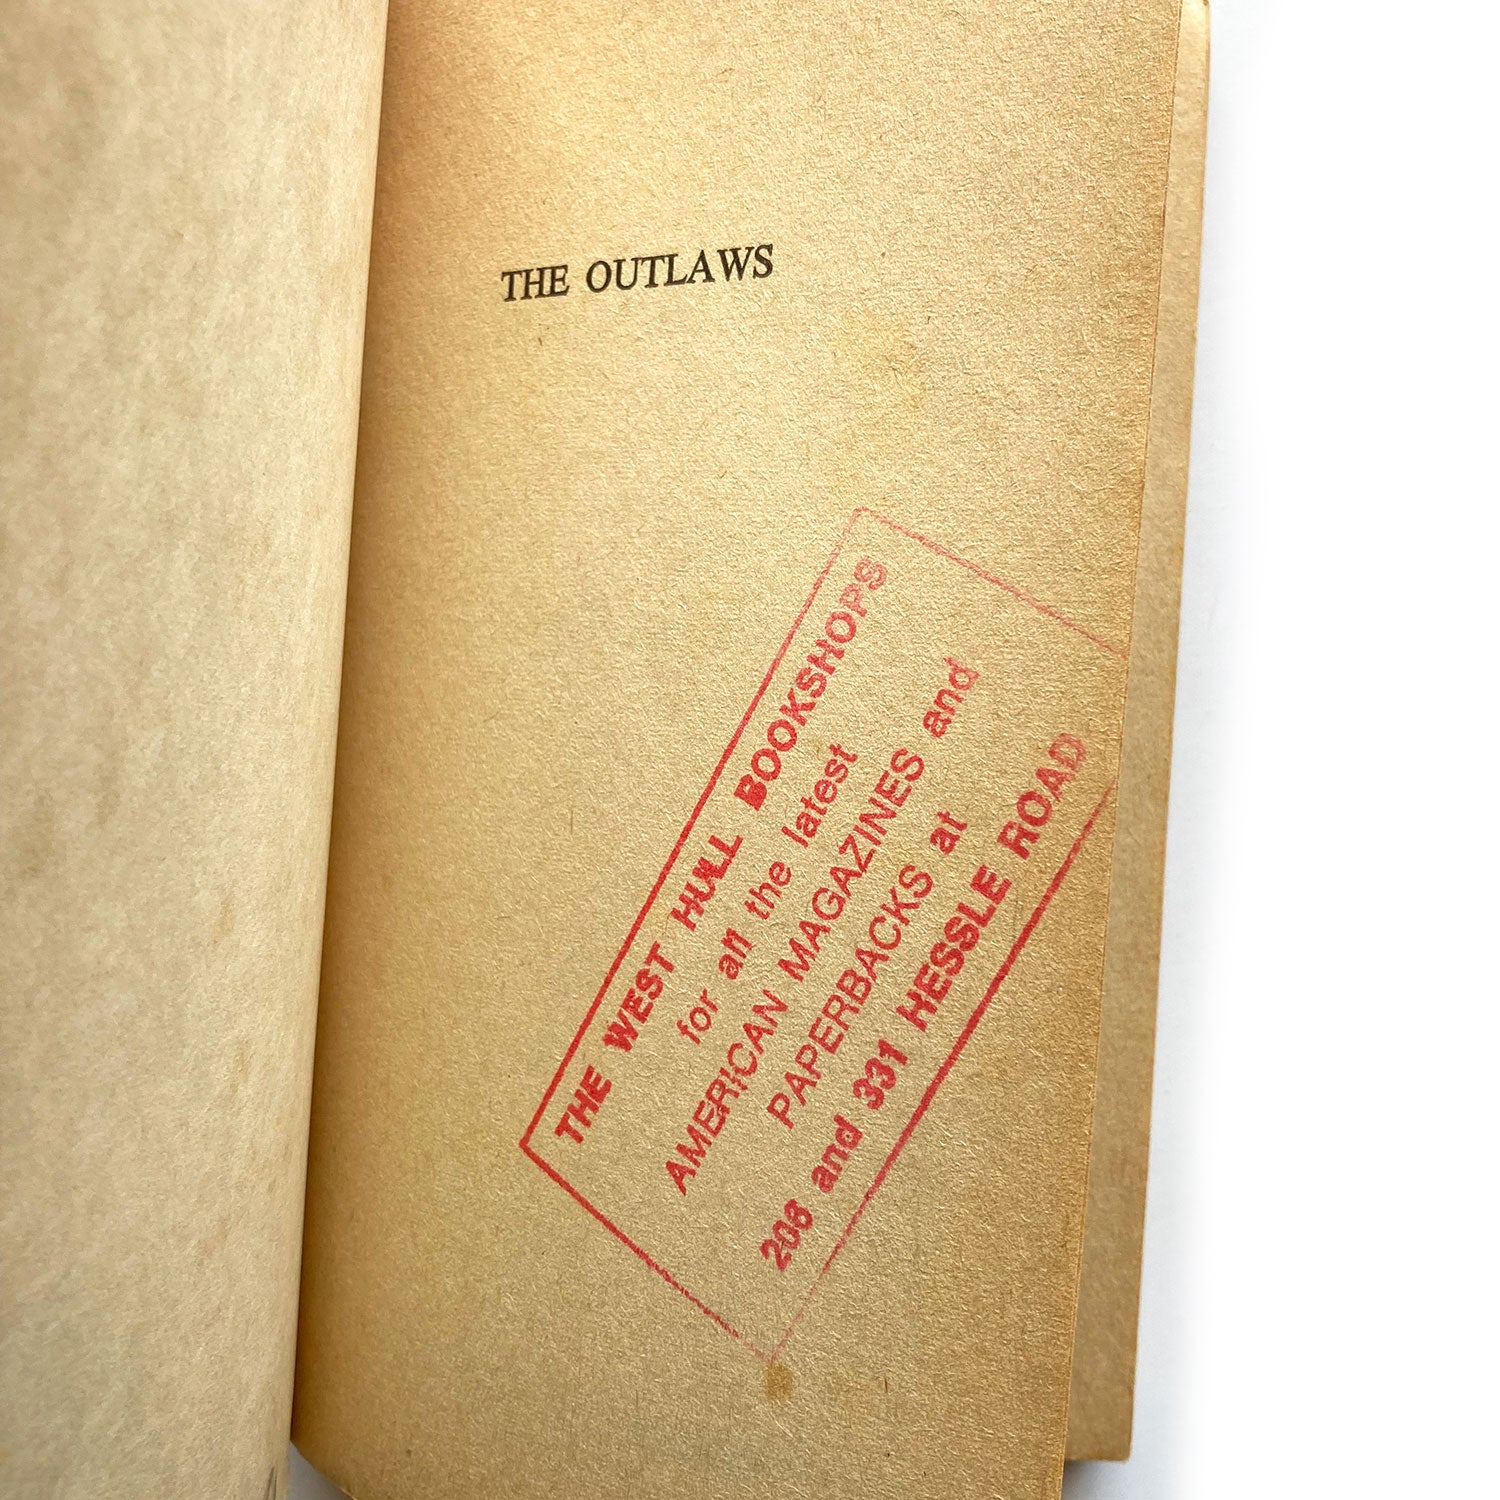 The Outlaws by Alex R. Stuart, First Edition paperback 1972, New English Library